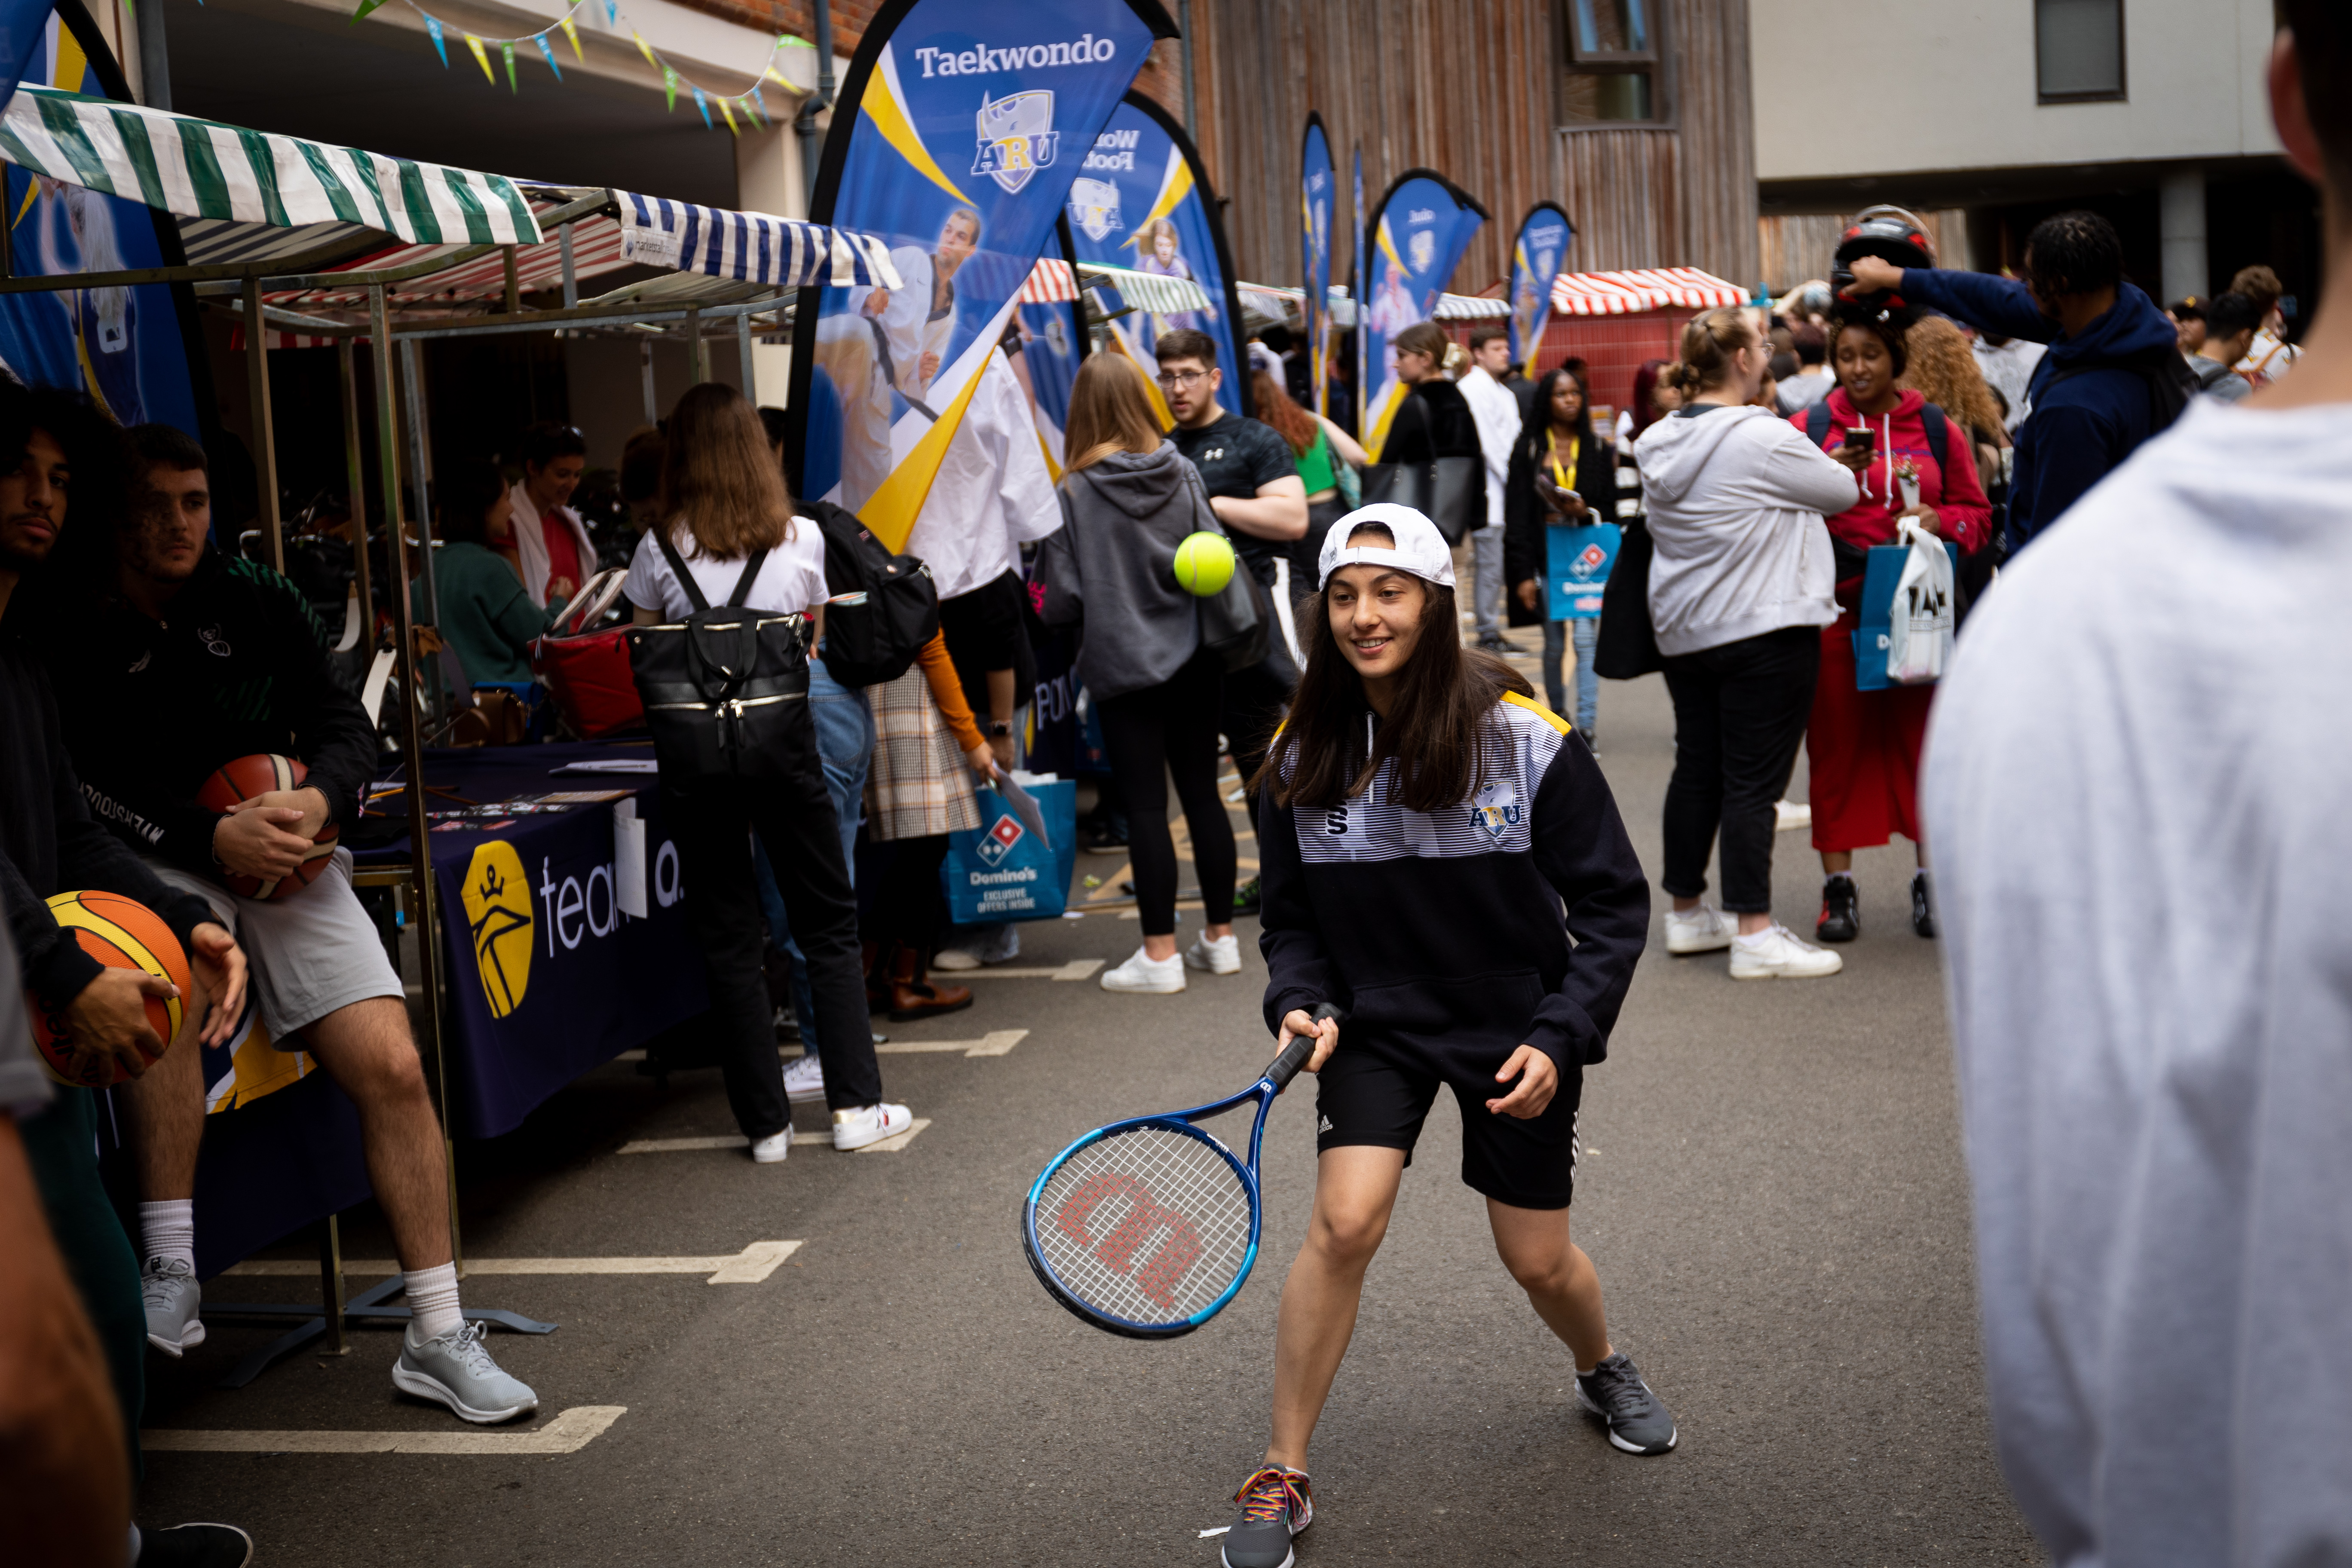 Woman hitting a ball with a tennis racket surrounded by Welcome Fair stalls